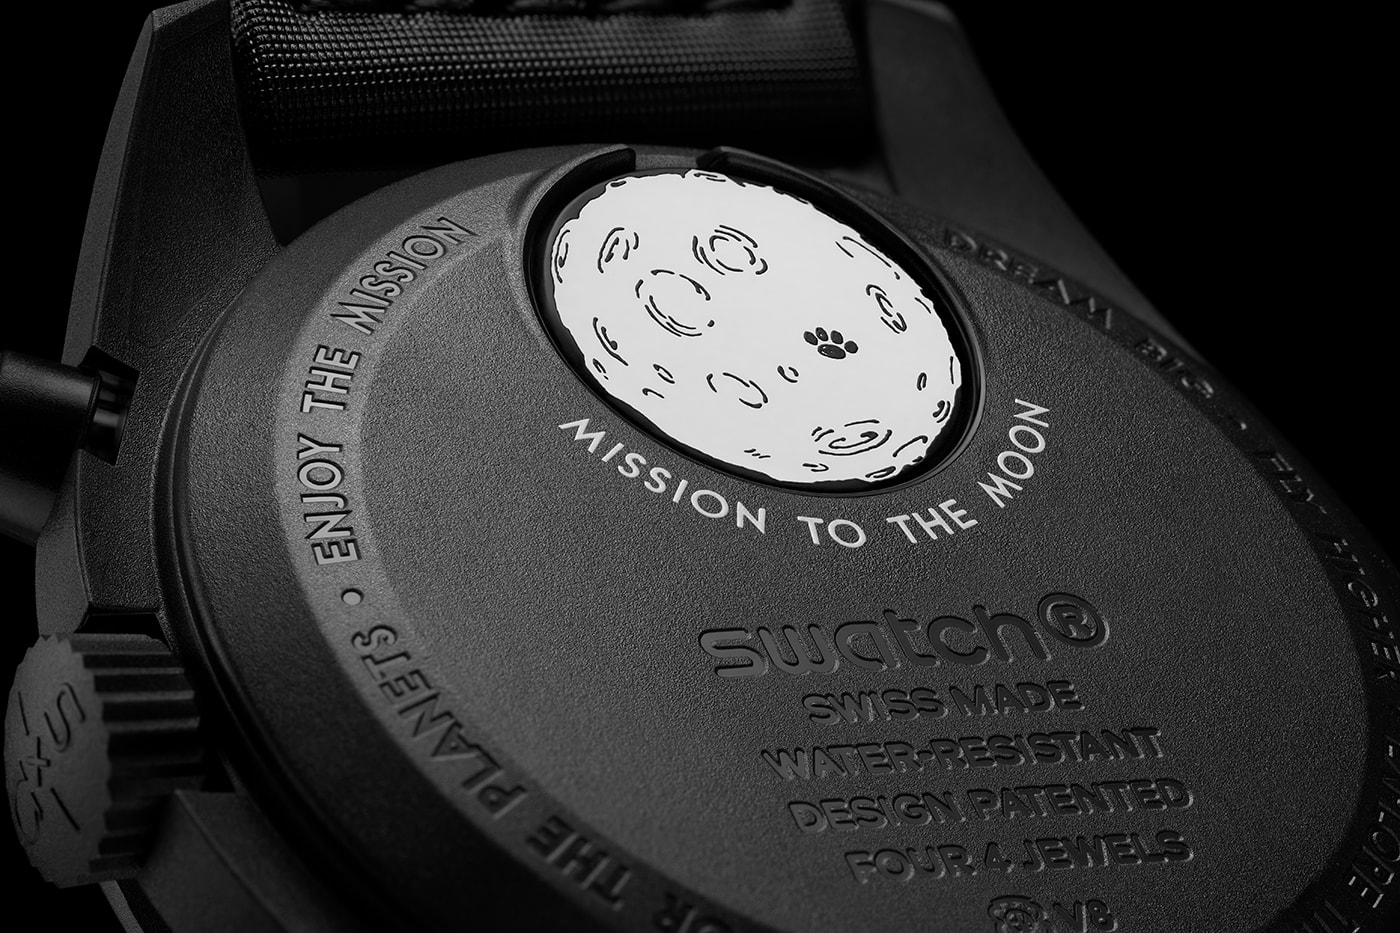 MoonSwatch Mission to the Moonphase Full Moon Release Info